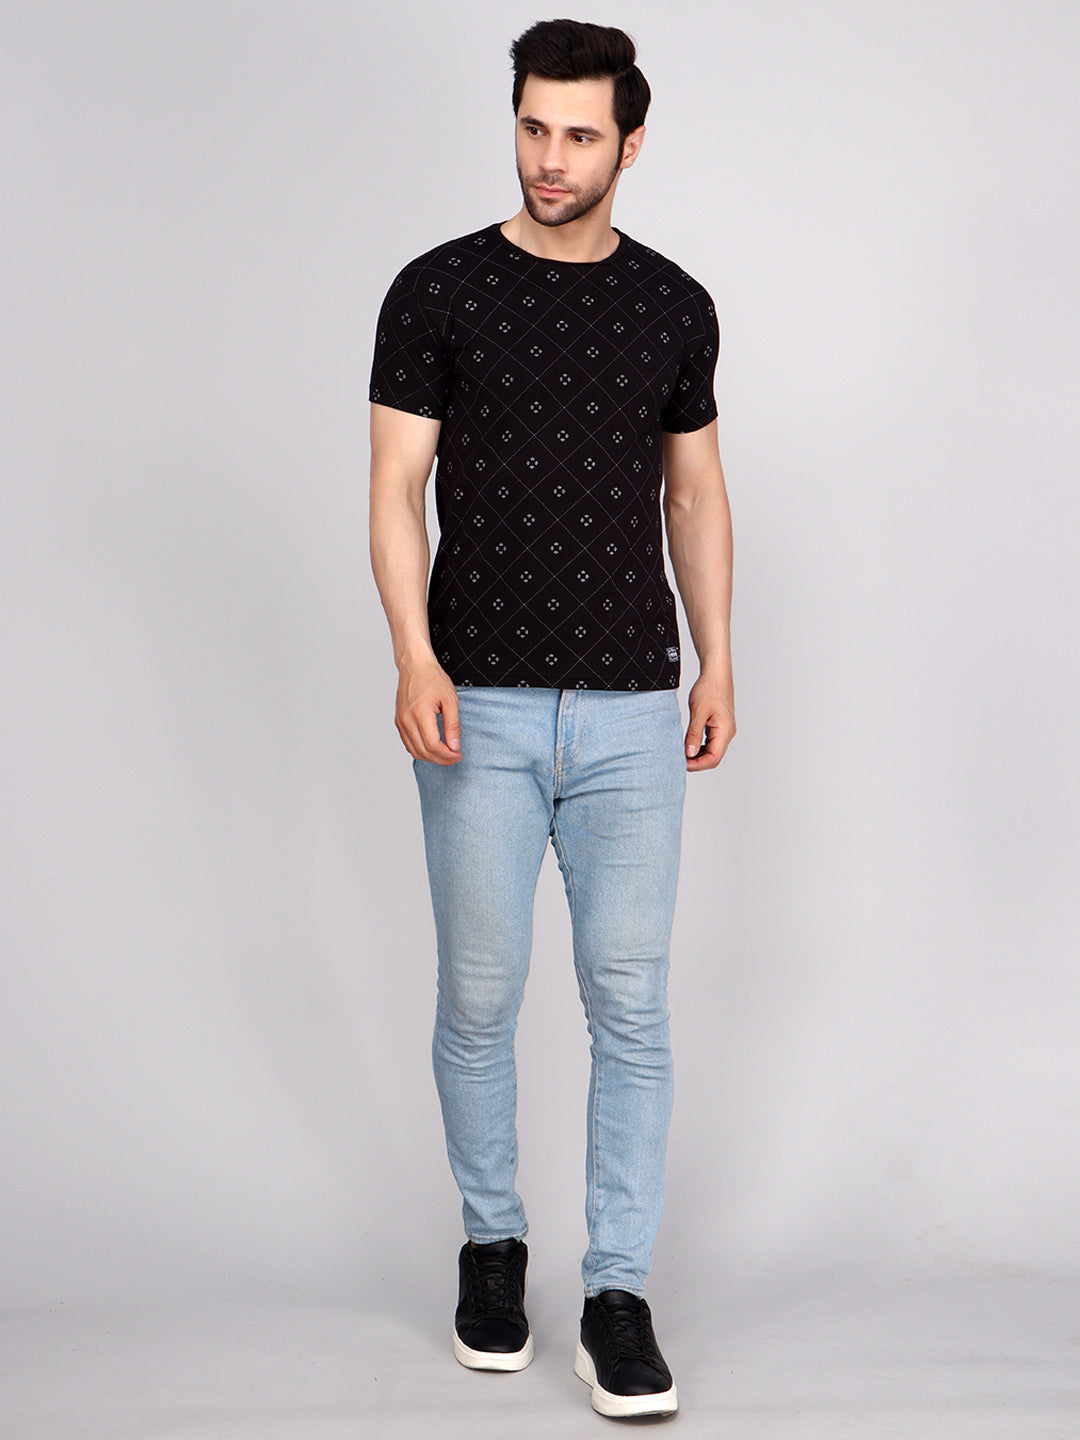 Lycra All Over Print  Tee